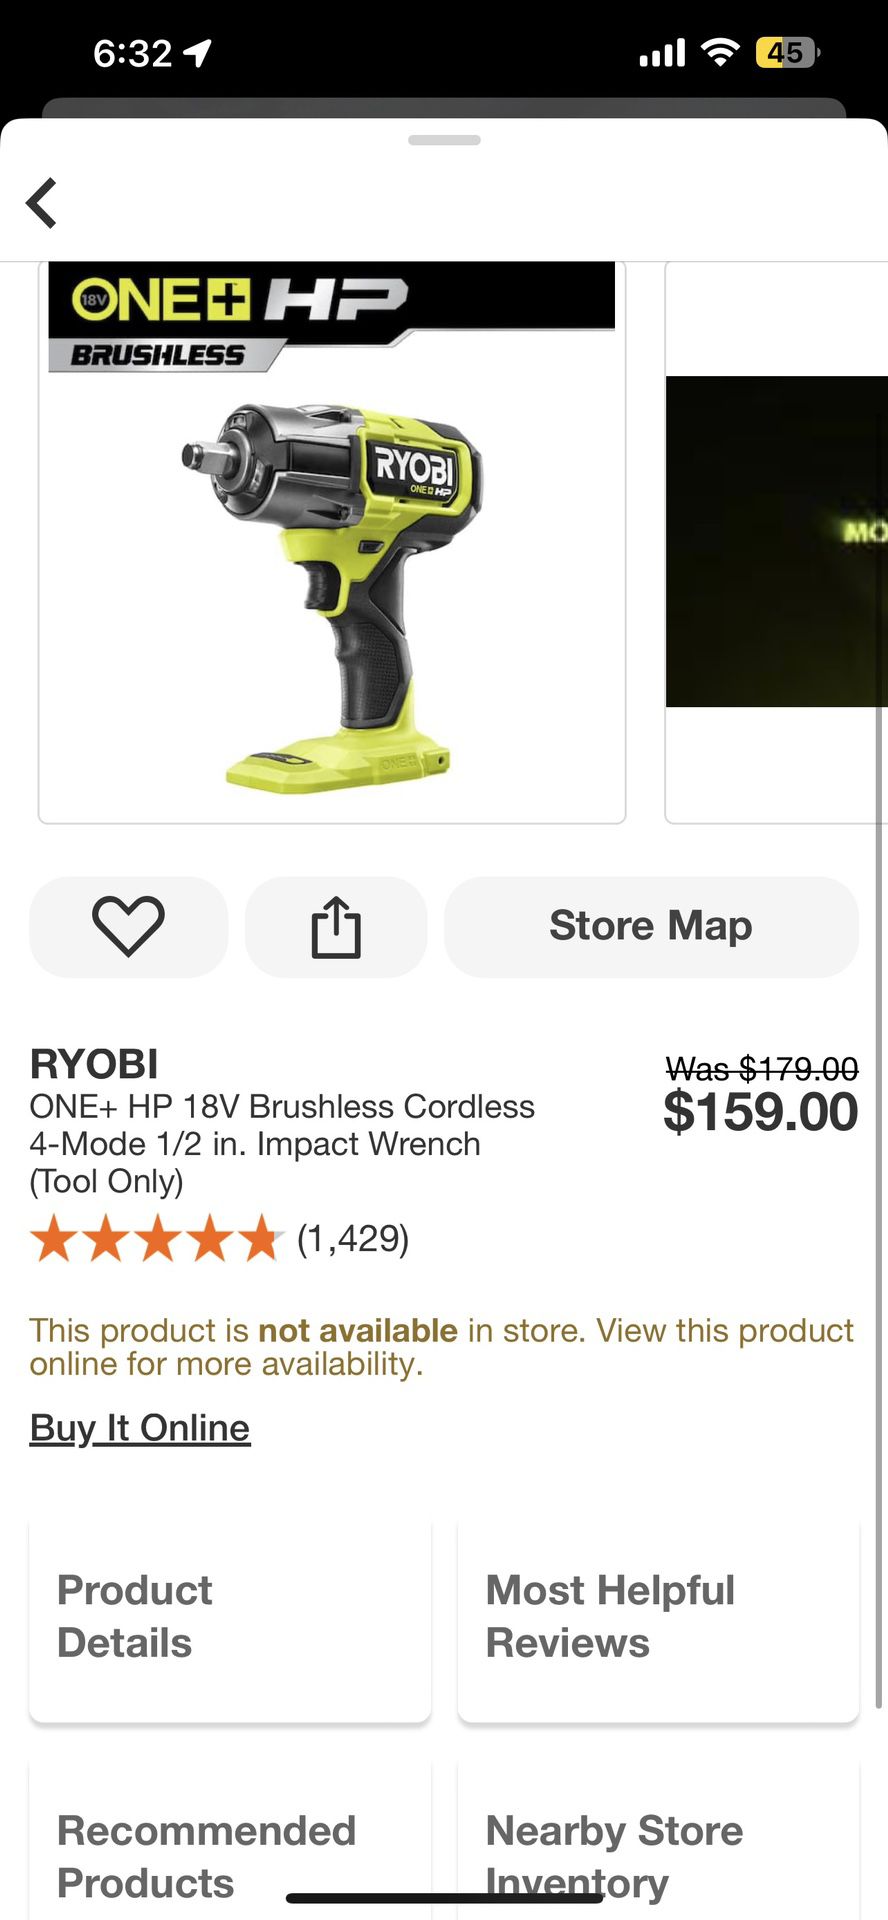 Ryobi ONE+ HP 18V Brushless Cordless 4-Mode 1/2 in. Impact Wrench (Tool Only)